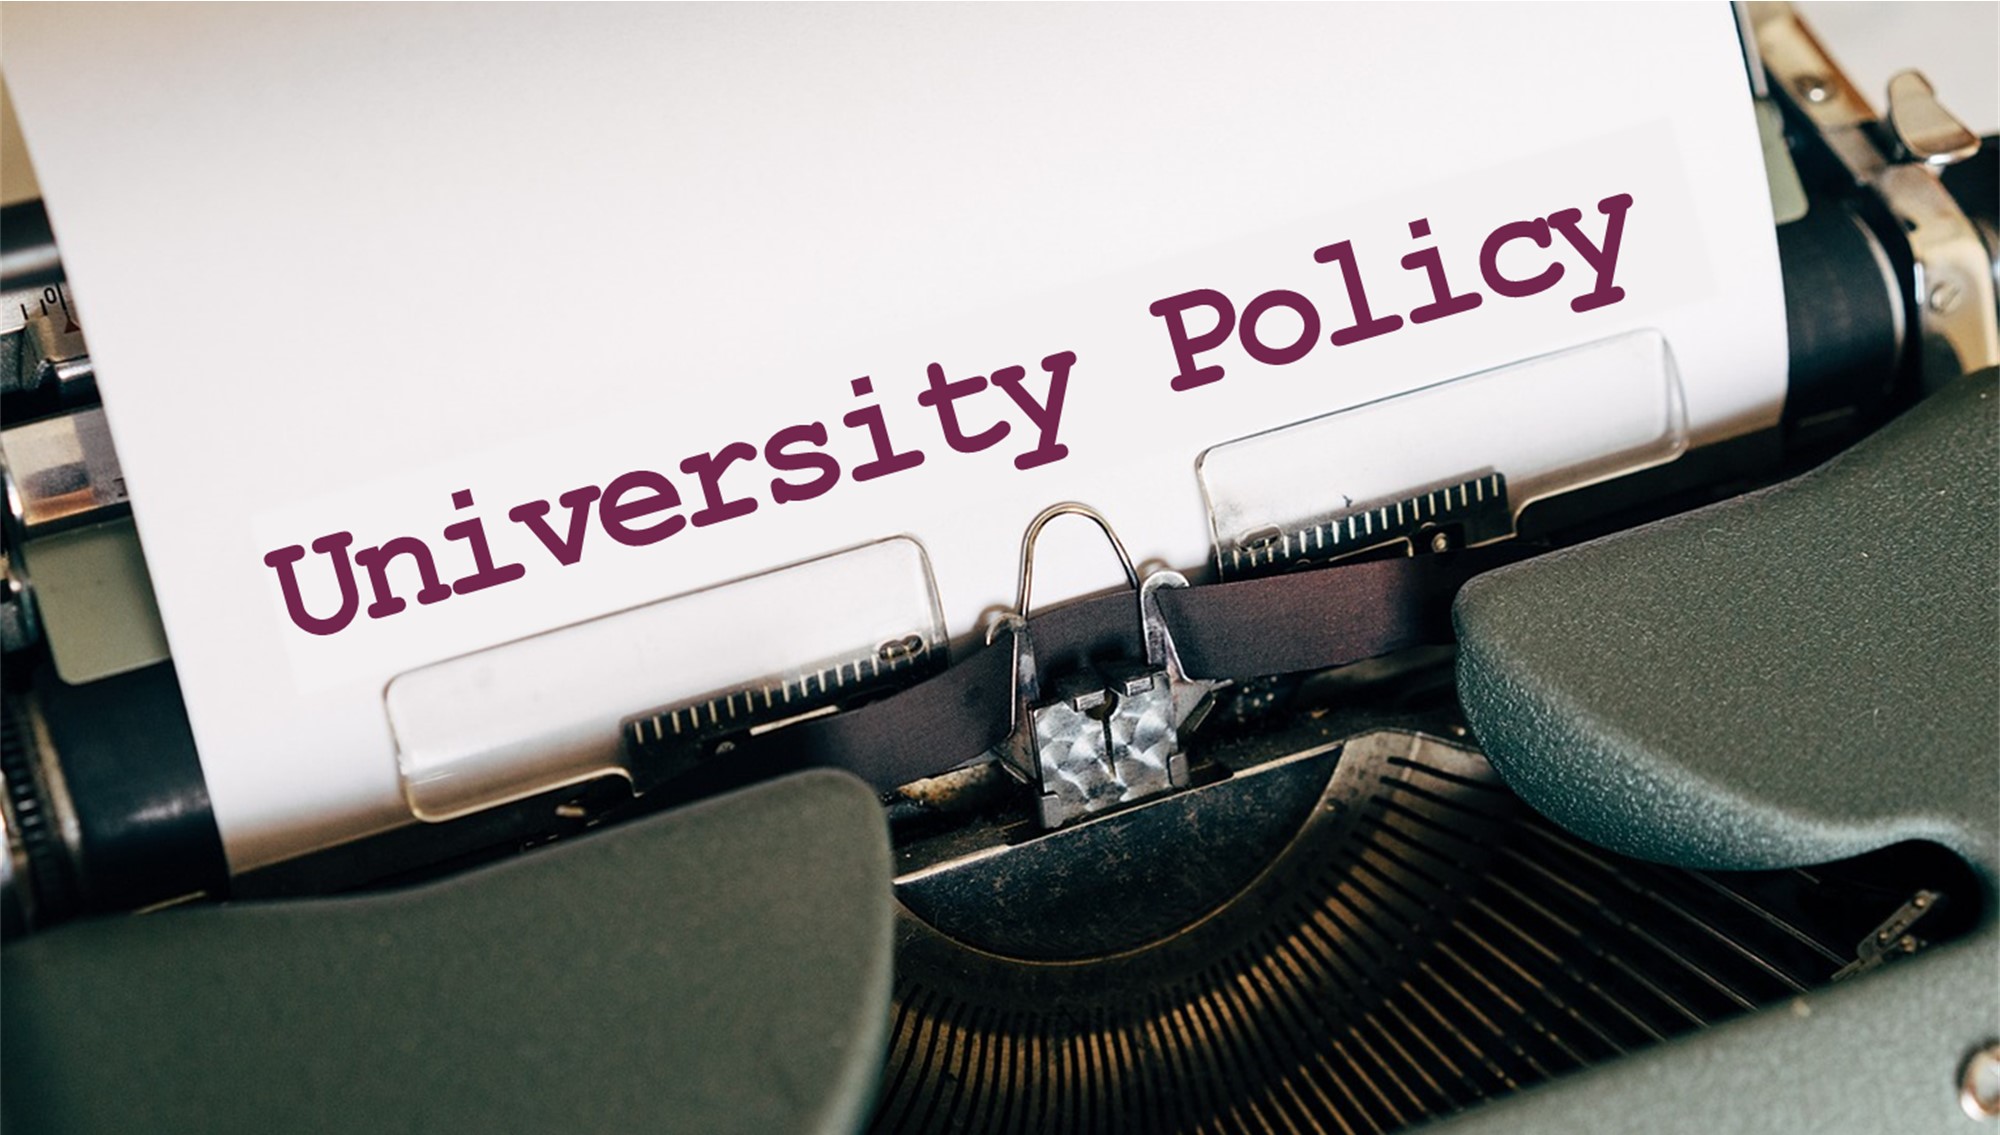 University Policy Training and Information Sessions